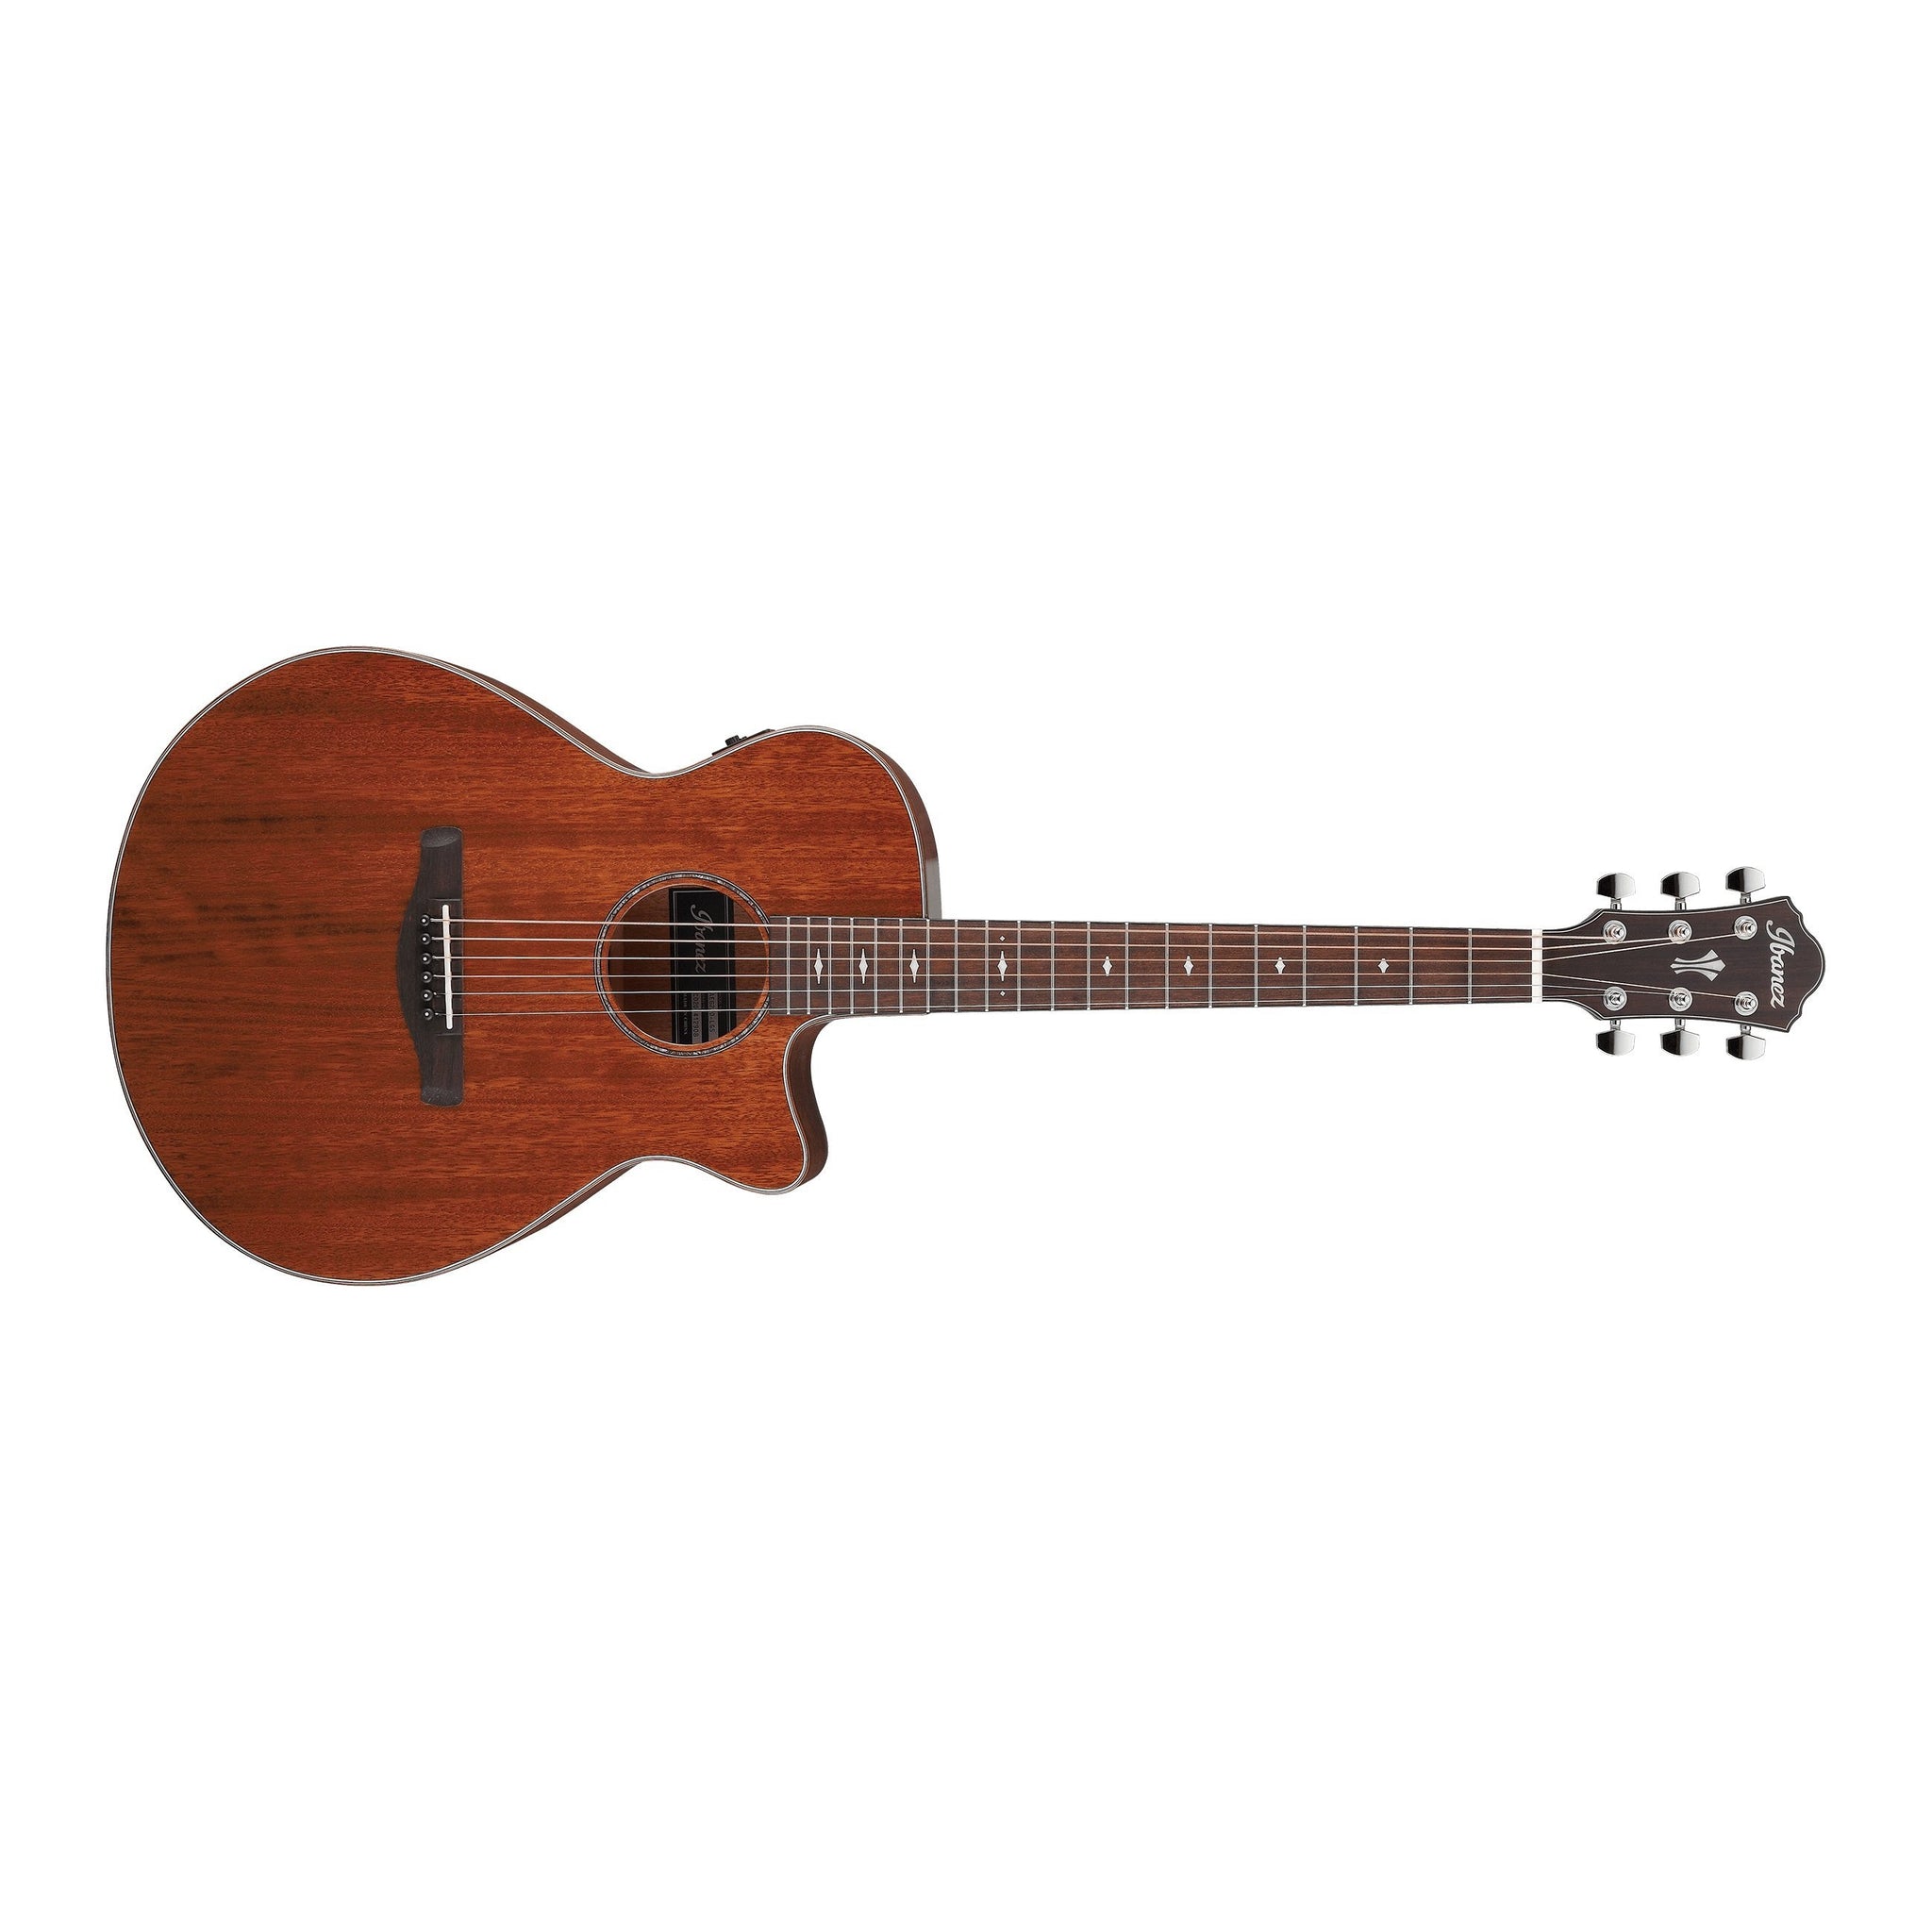 Ibanez AEG220- LGS AEG Series Acoustic/Electric Guitar-Natural Low Gloss-Music World Academy